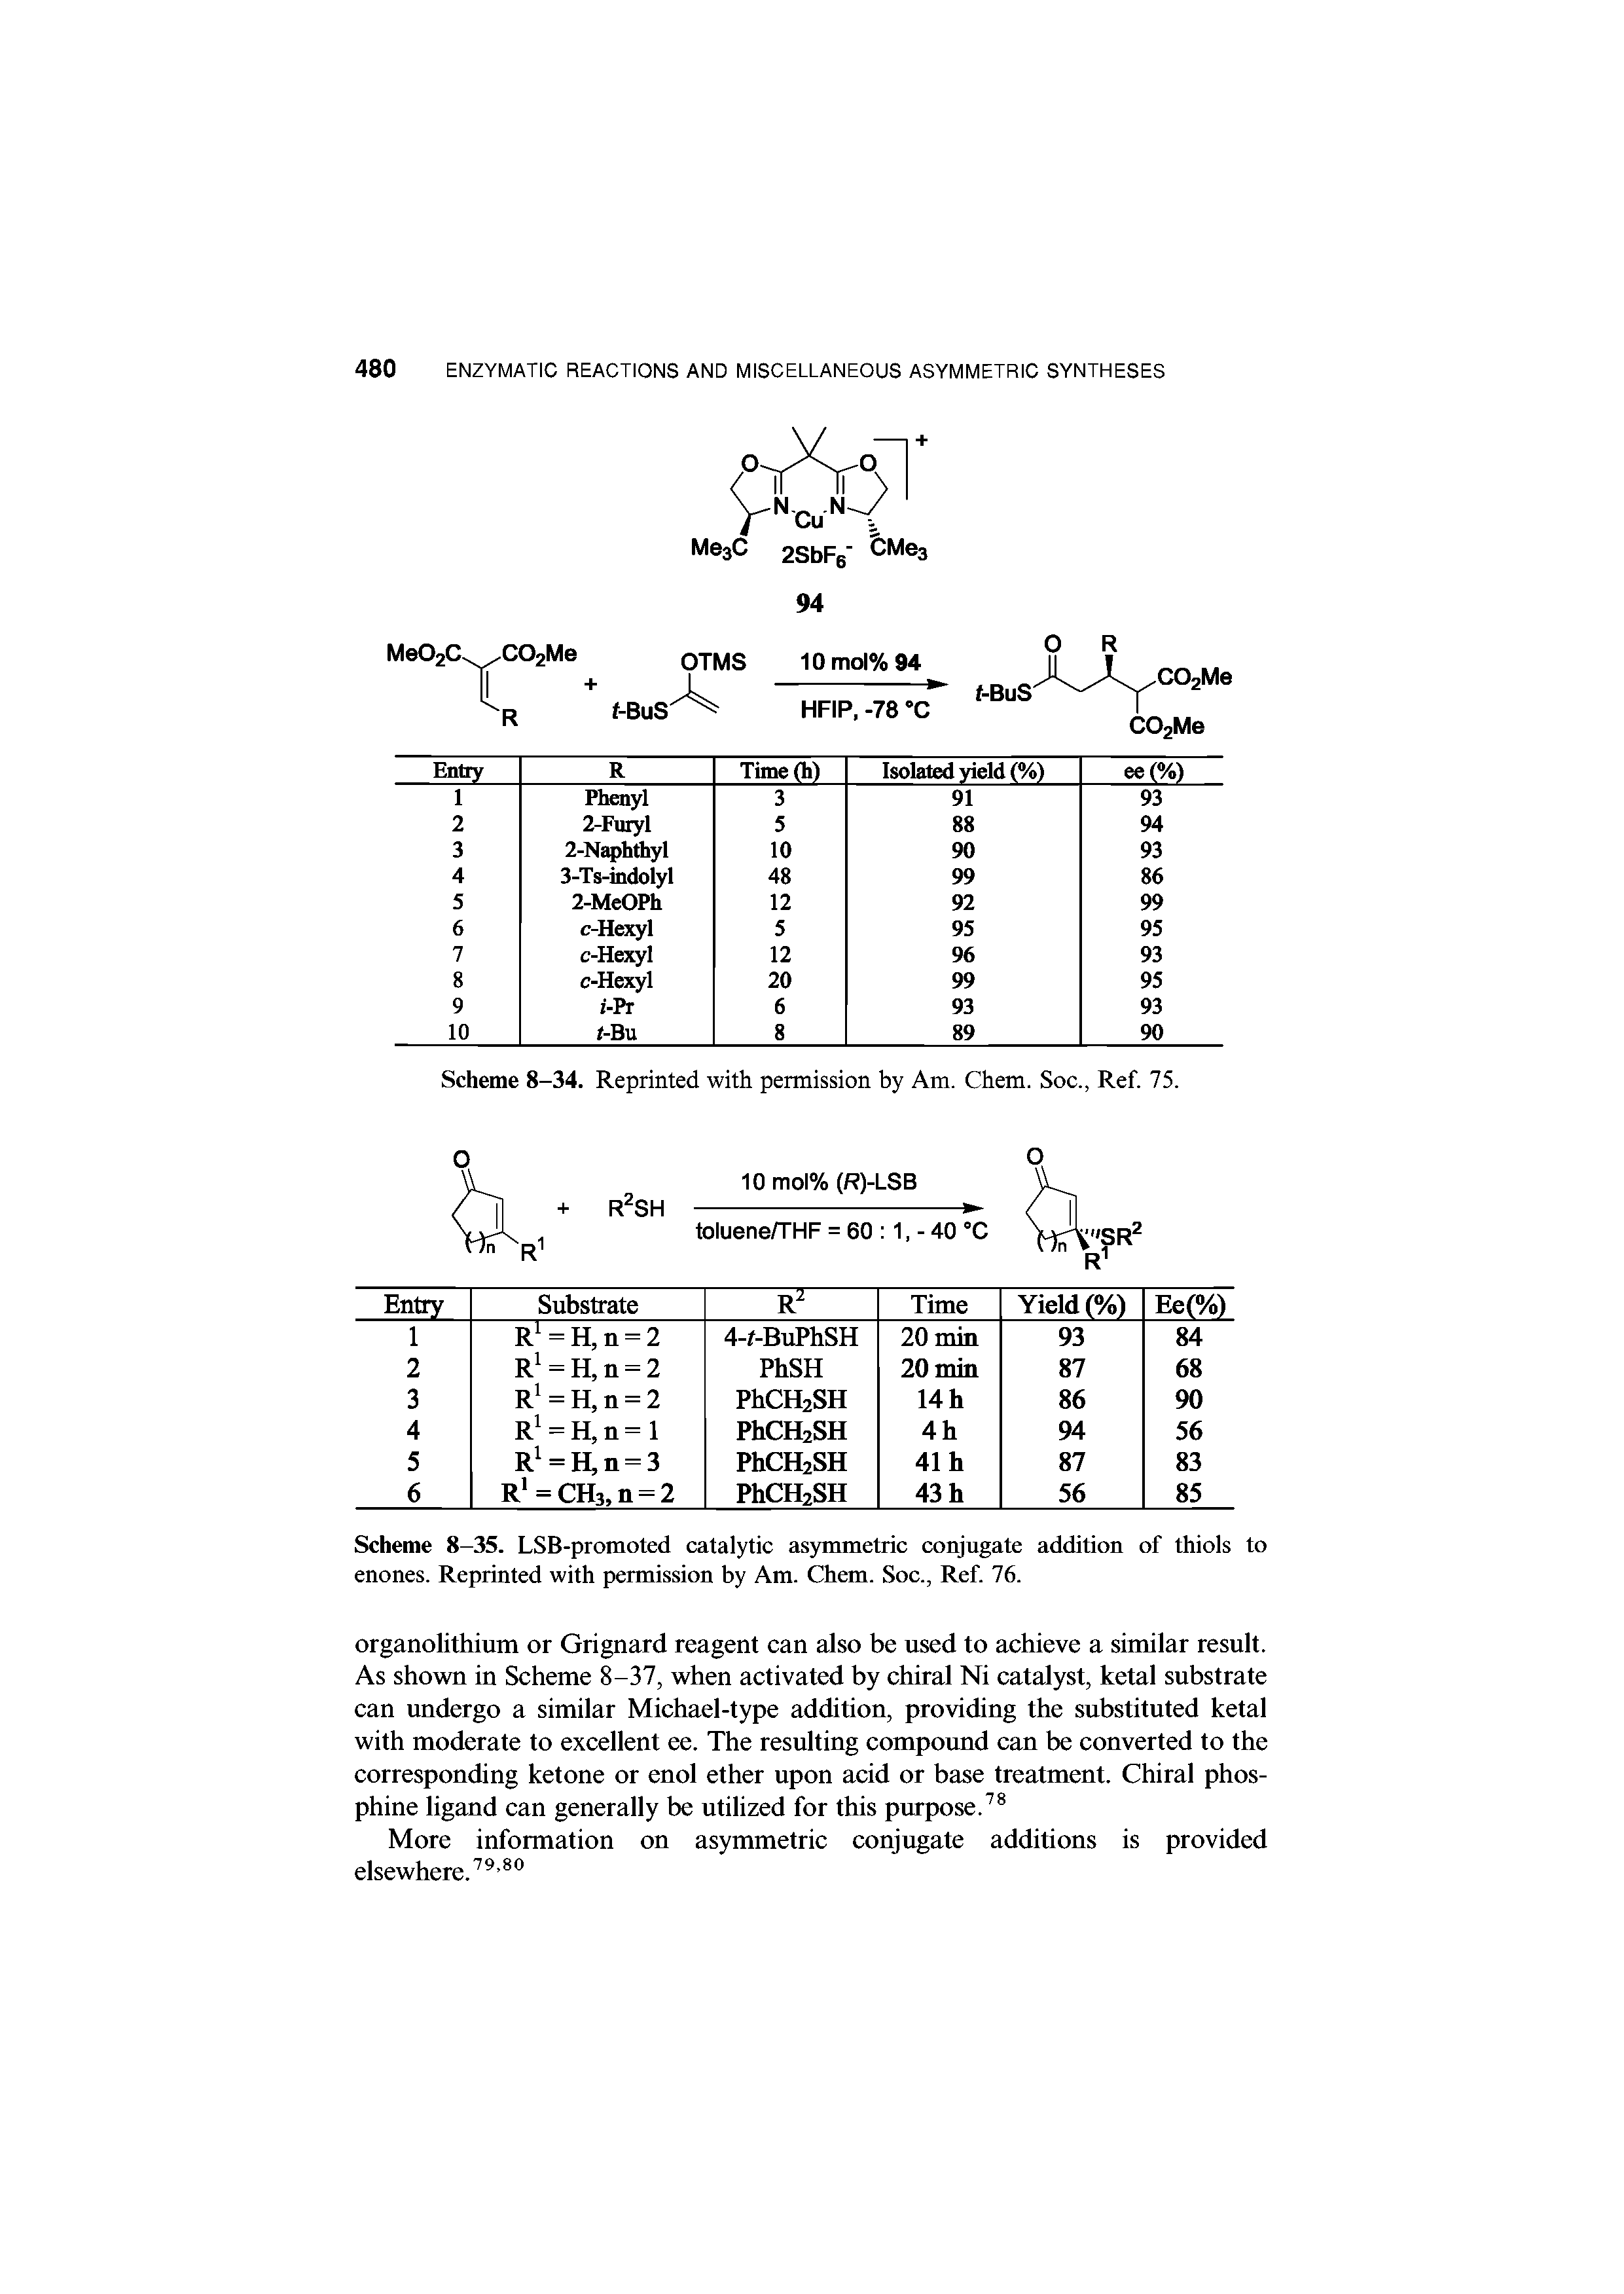 Scheme 8-35. LSB-promoted catalytic asymmetric conjugate addition of thiols to enones. Reprinted with permission by Am. Chem. Soc., Ref. 76.